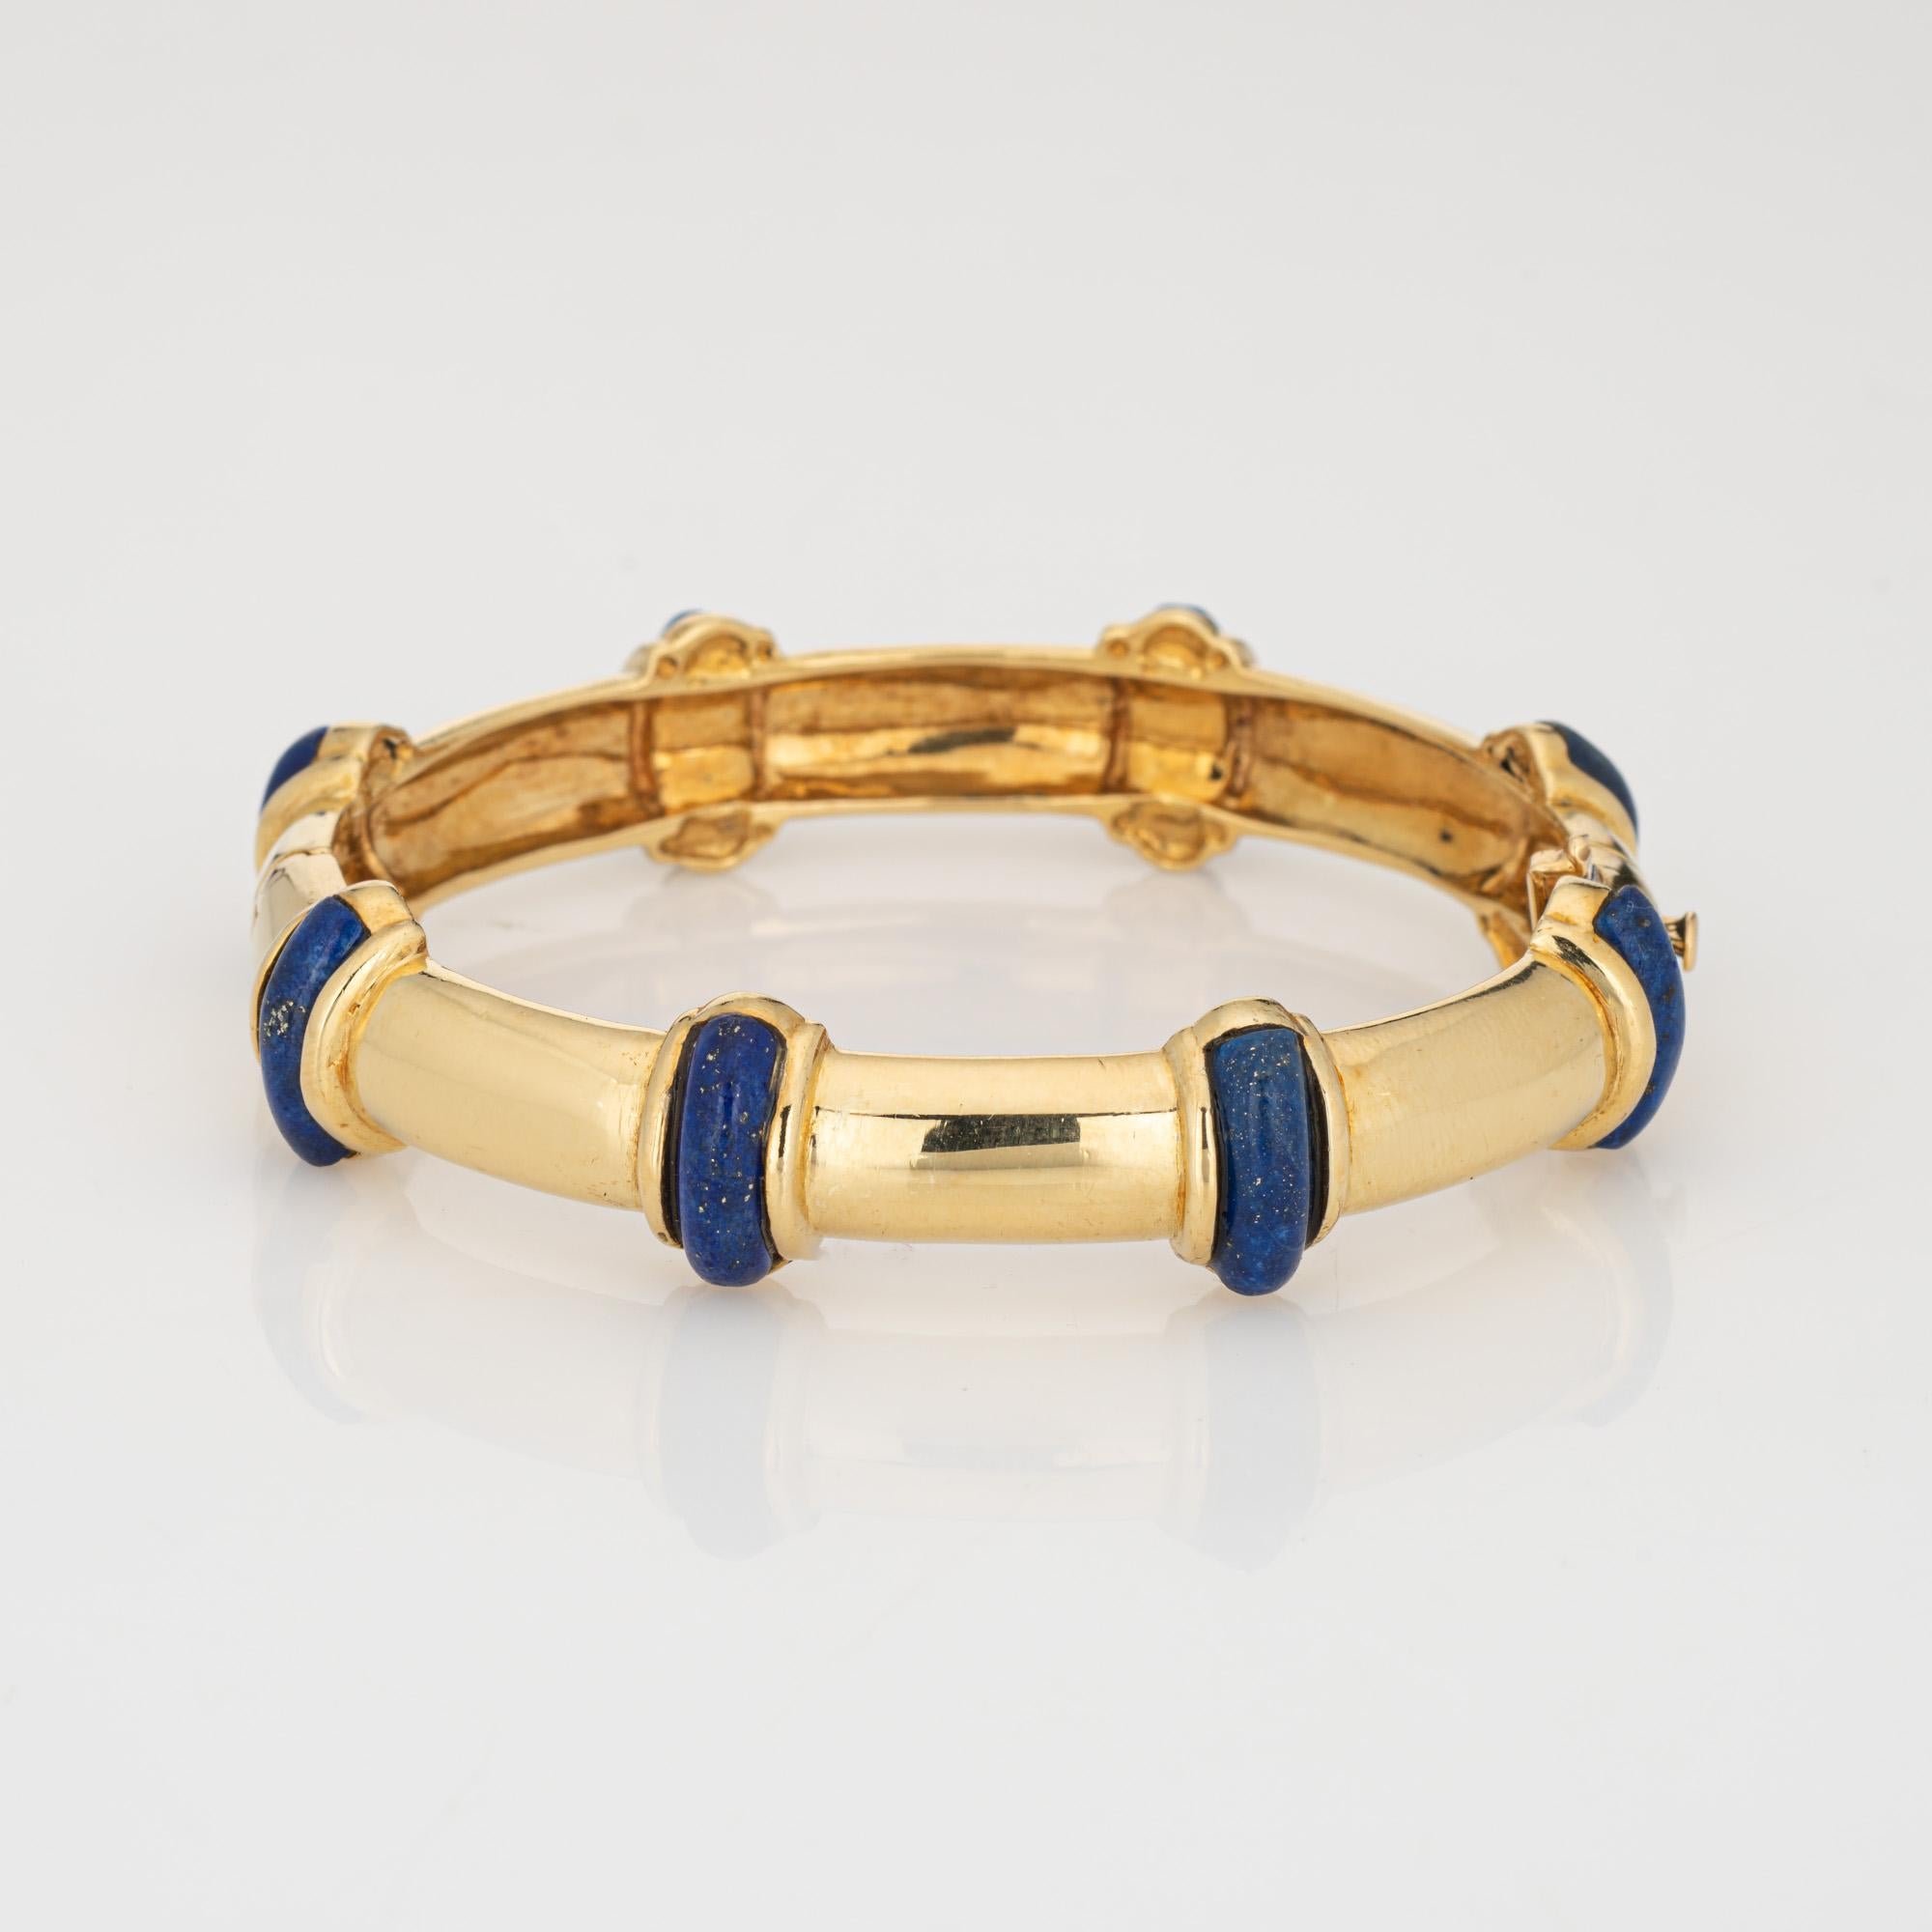 Stylish and finely detailed vintage Tiffany & Co lapis lazuli bangle bracelet, crafted in 18 karat yellow gold.

Lapis lazuli cabochons measure 12mm x 4mm. The lapis is in very good condition and free of cracks or chips.
The bracelet features lapis